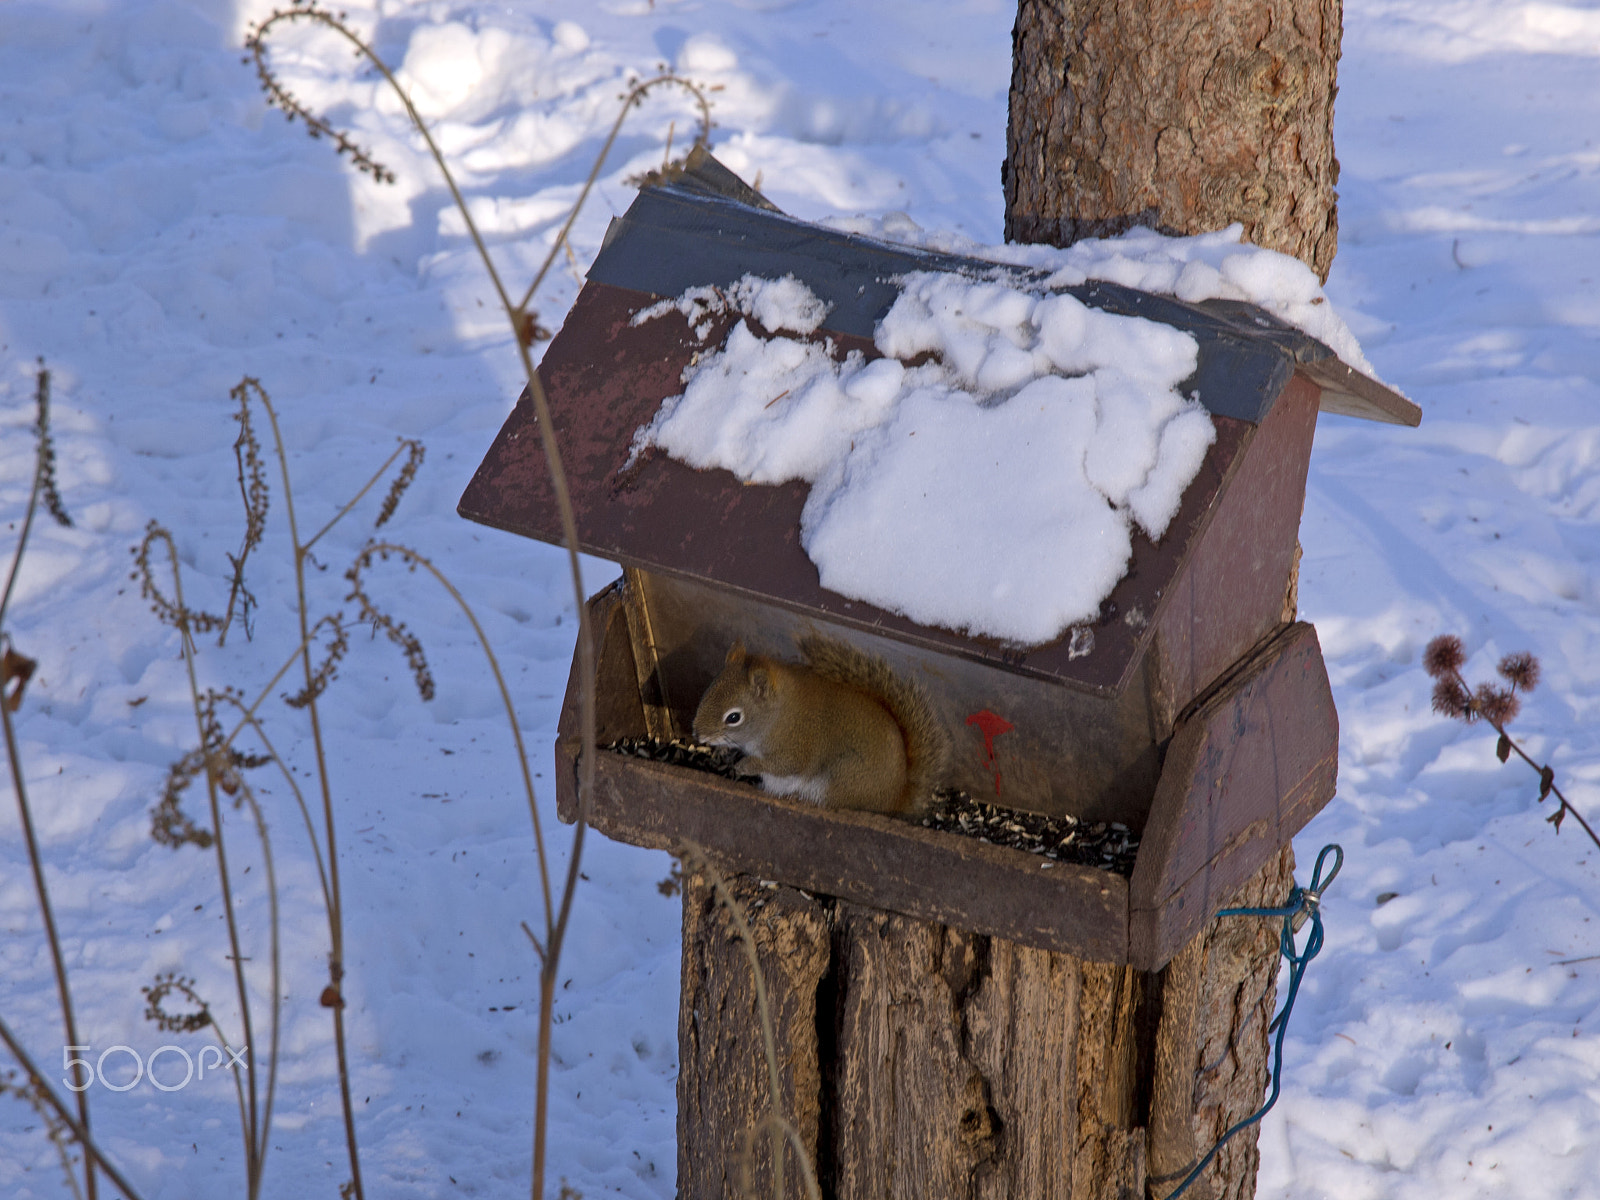 Olympus E-5 sample photo. Squirrel in the bird feeder photography